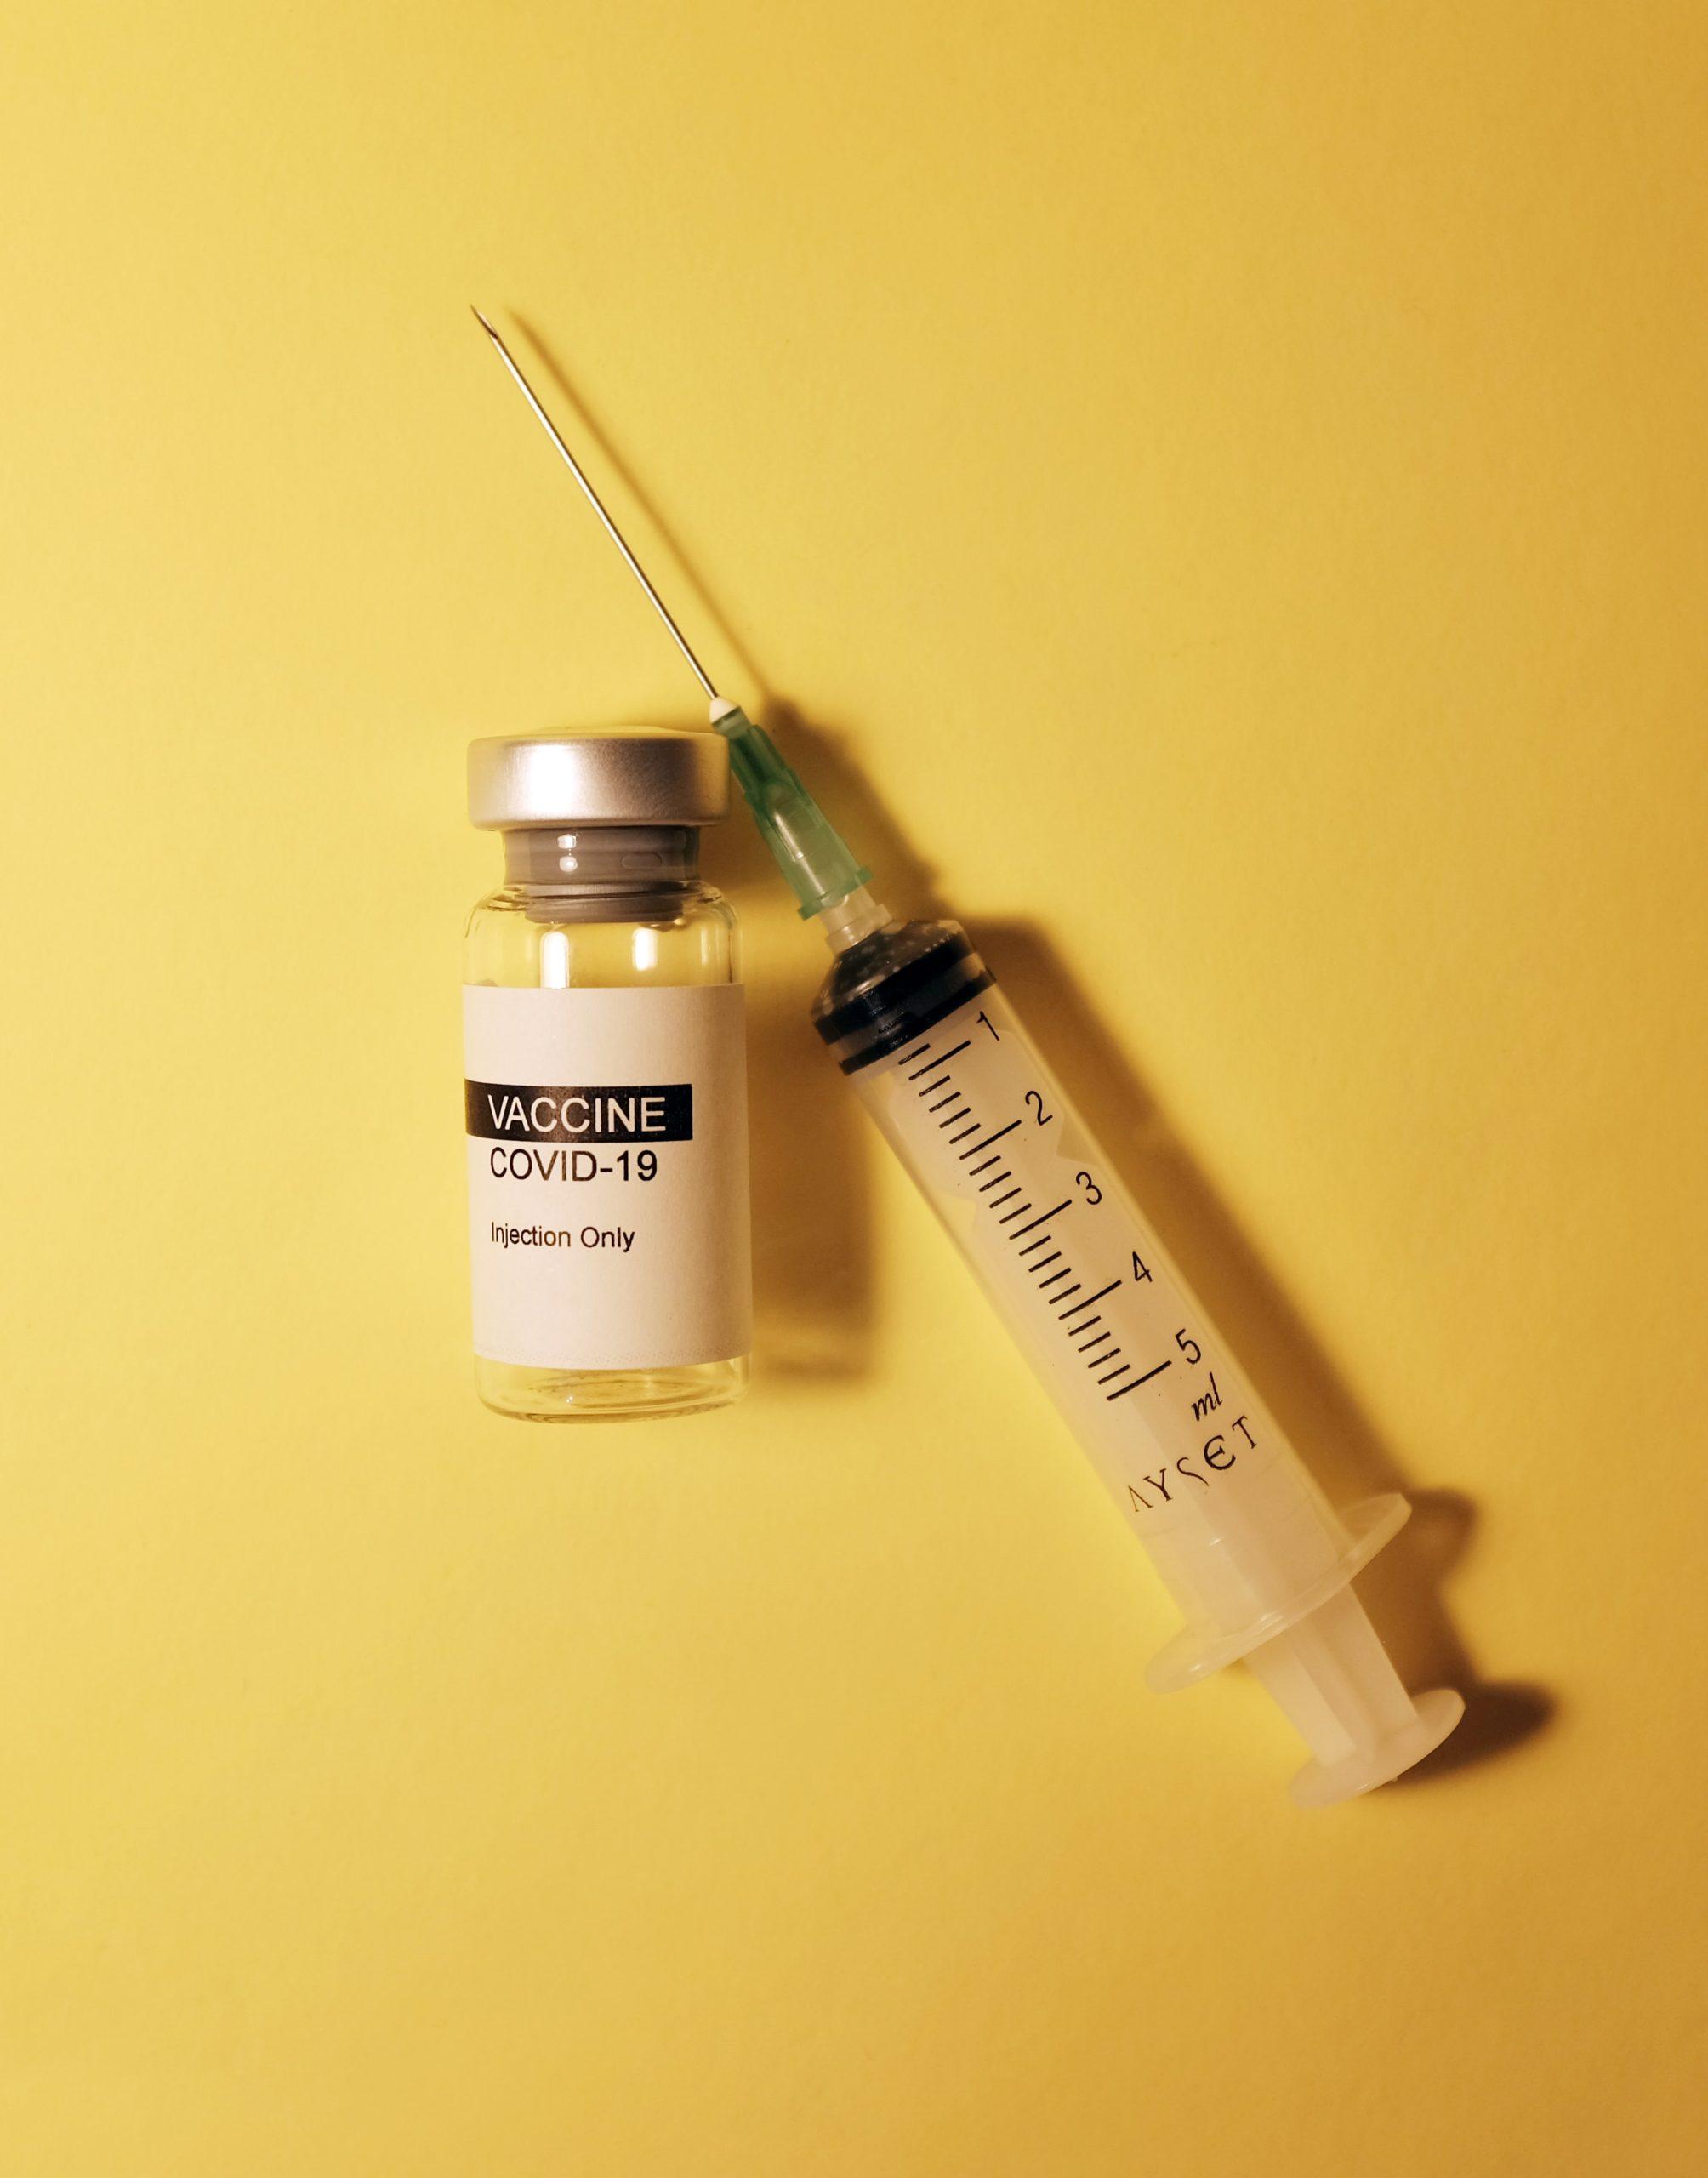 UCSD Study shows Increased Vaccination Hesitancy among Republicans